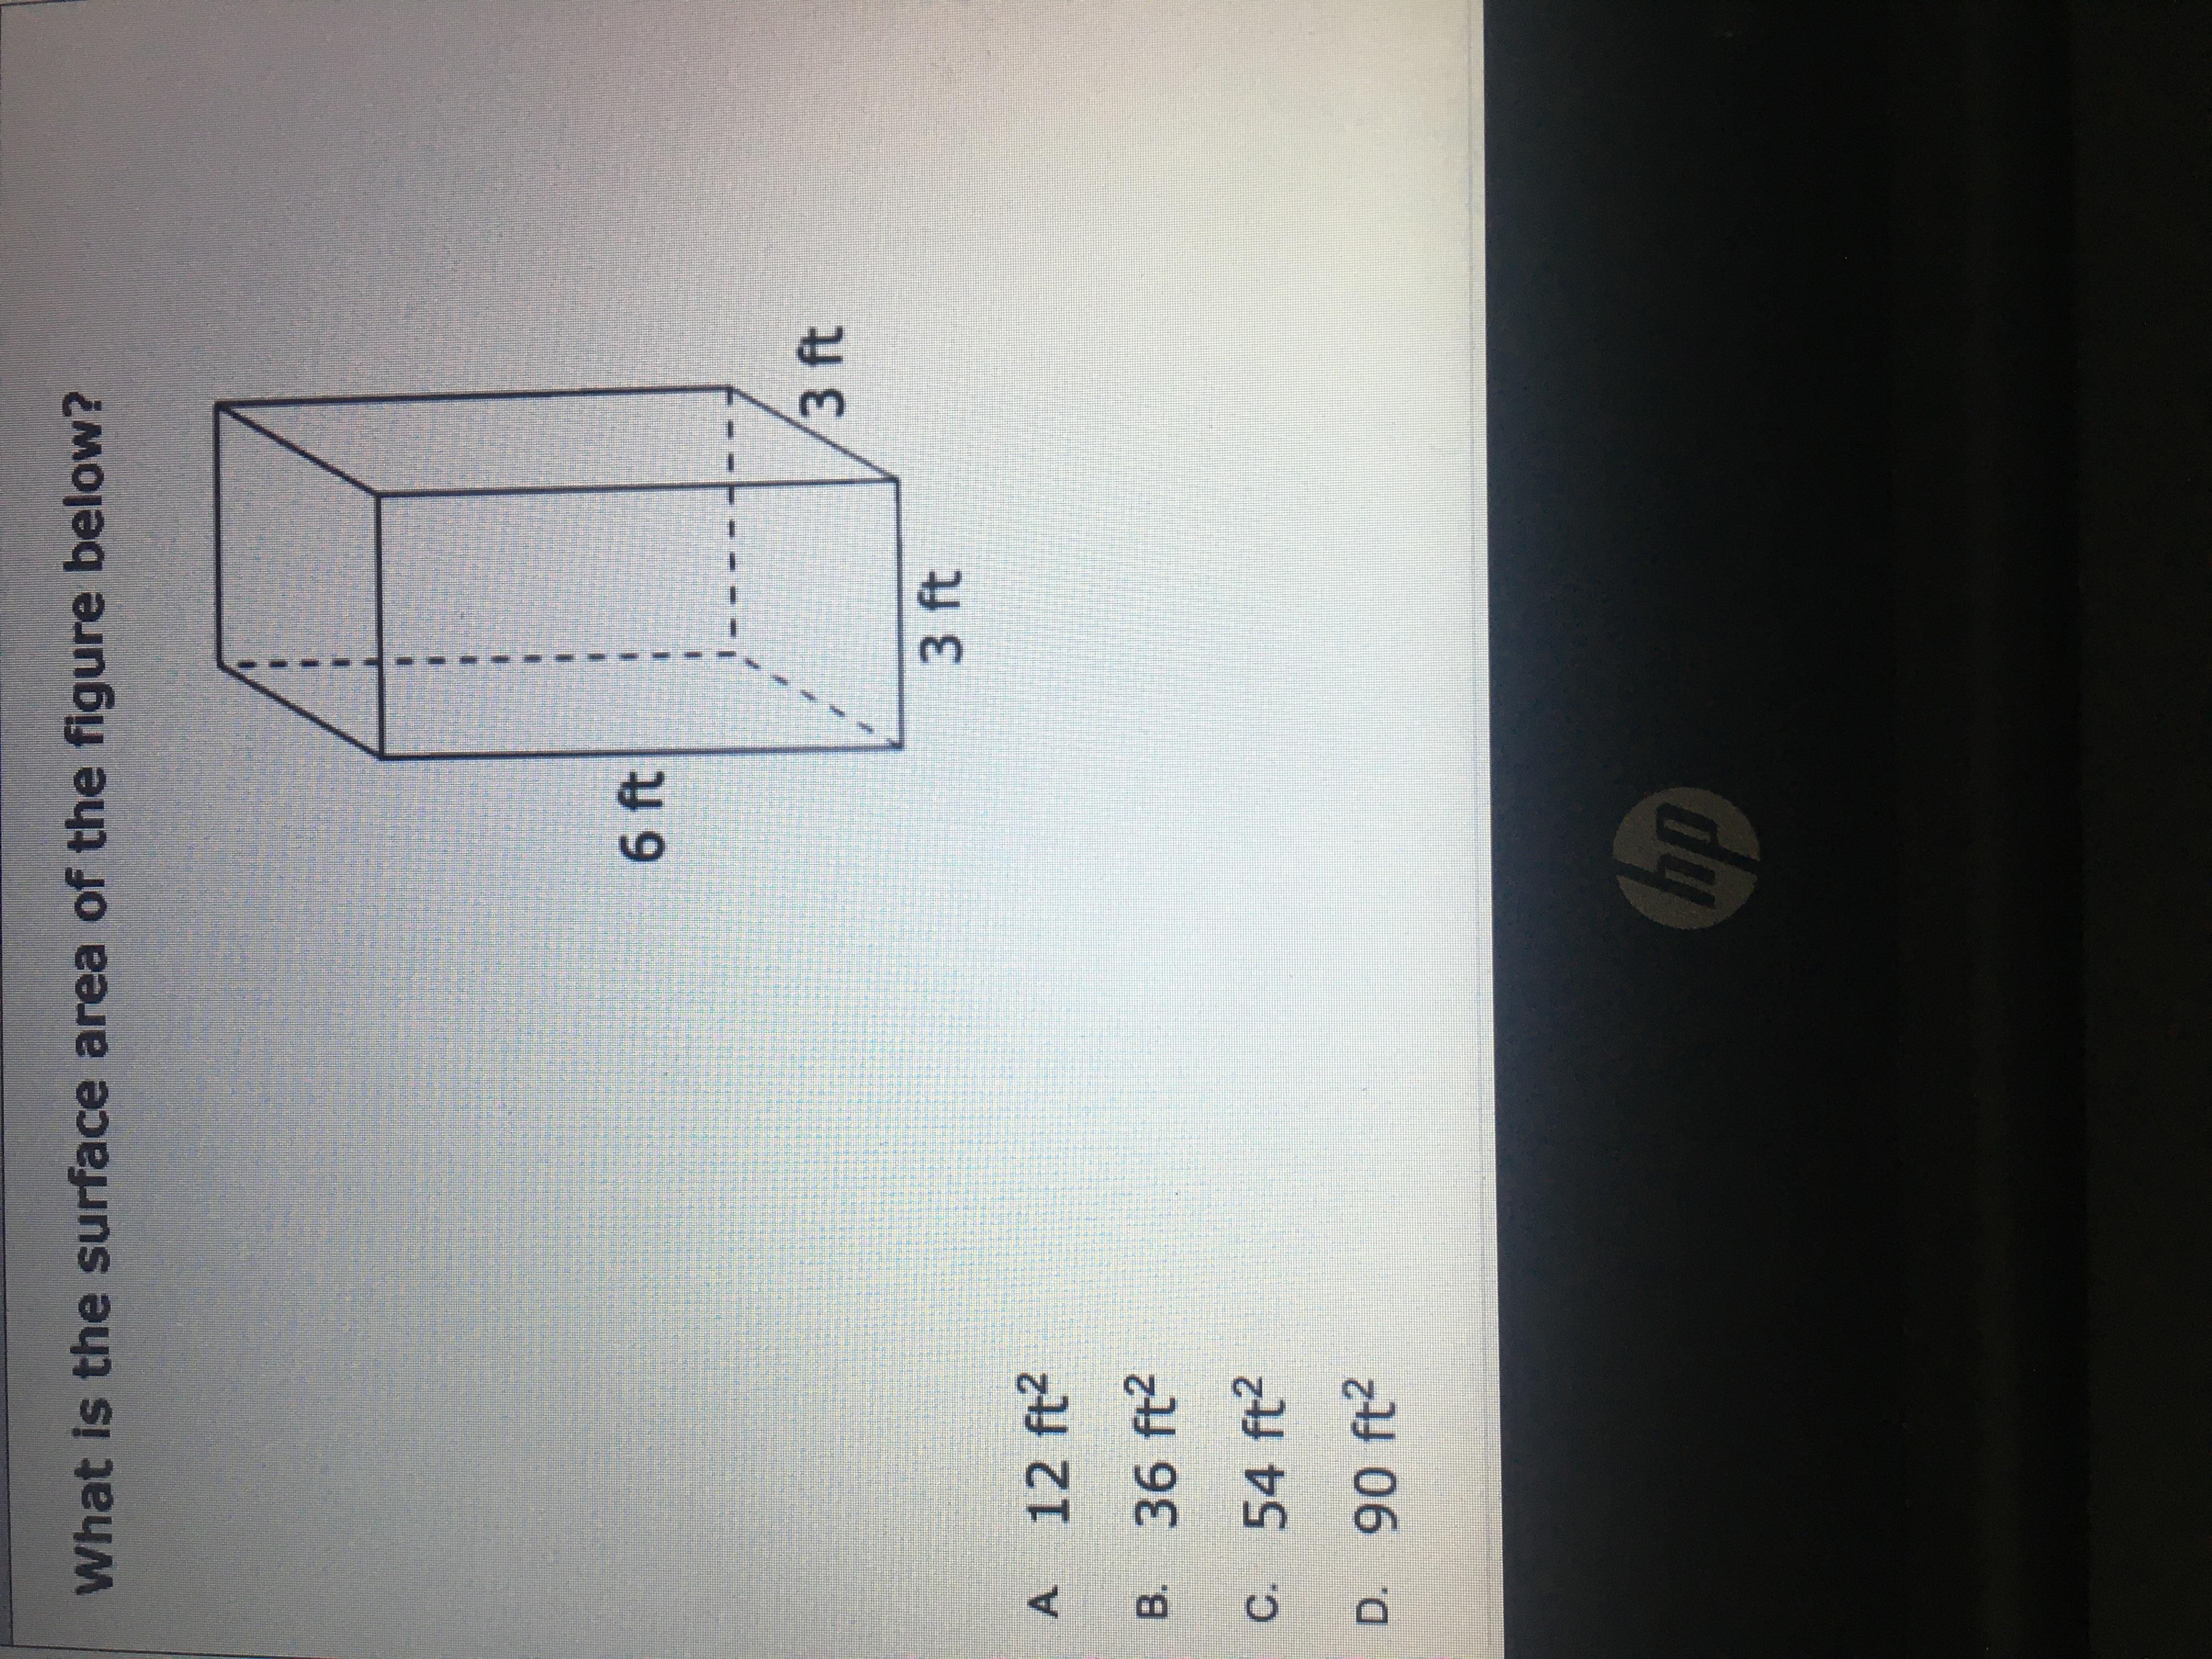 PLEASE HELP THIS IS URGENT What Is The Surface Area Of The Figure Below?A. 12ftB. 36ftC. 54ft D. 90ft